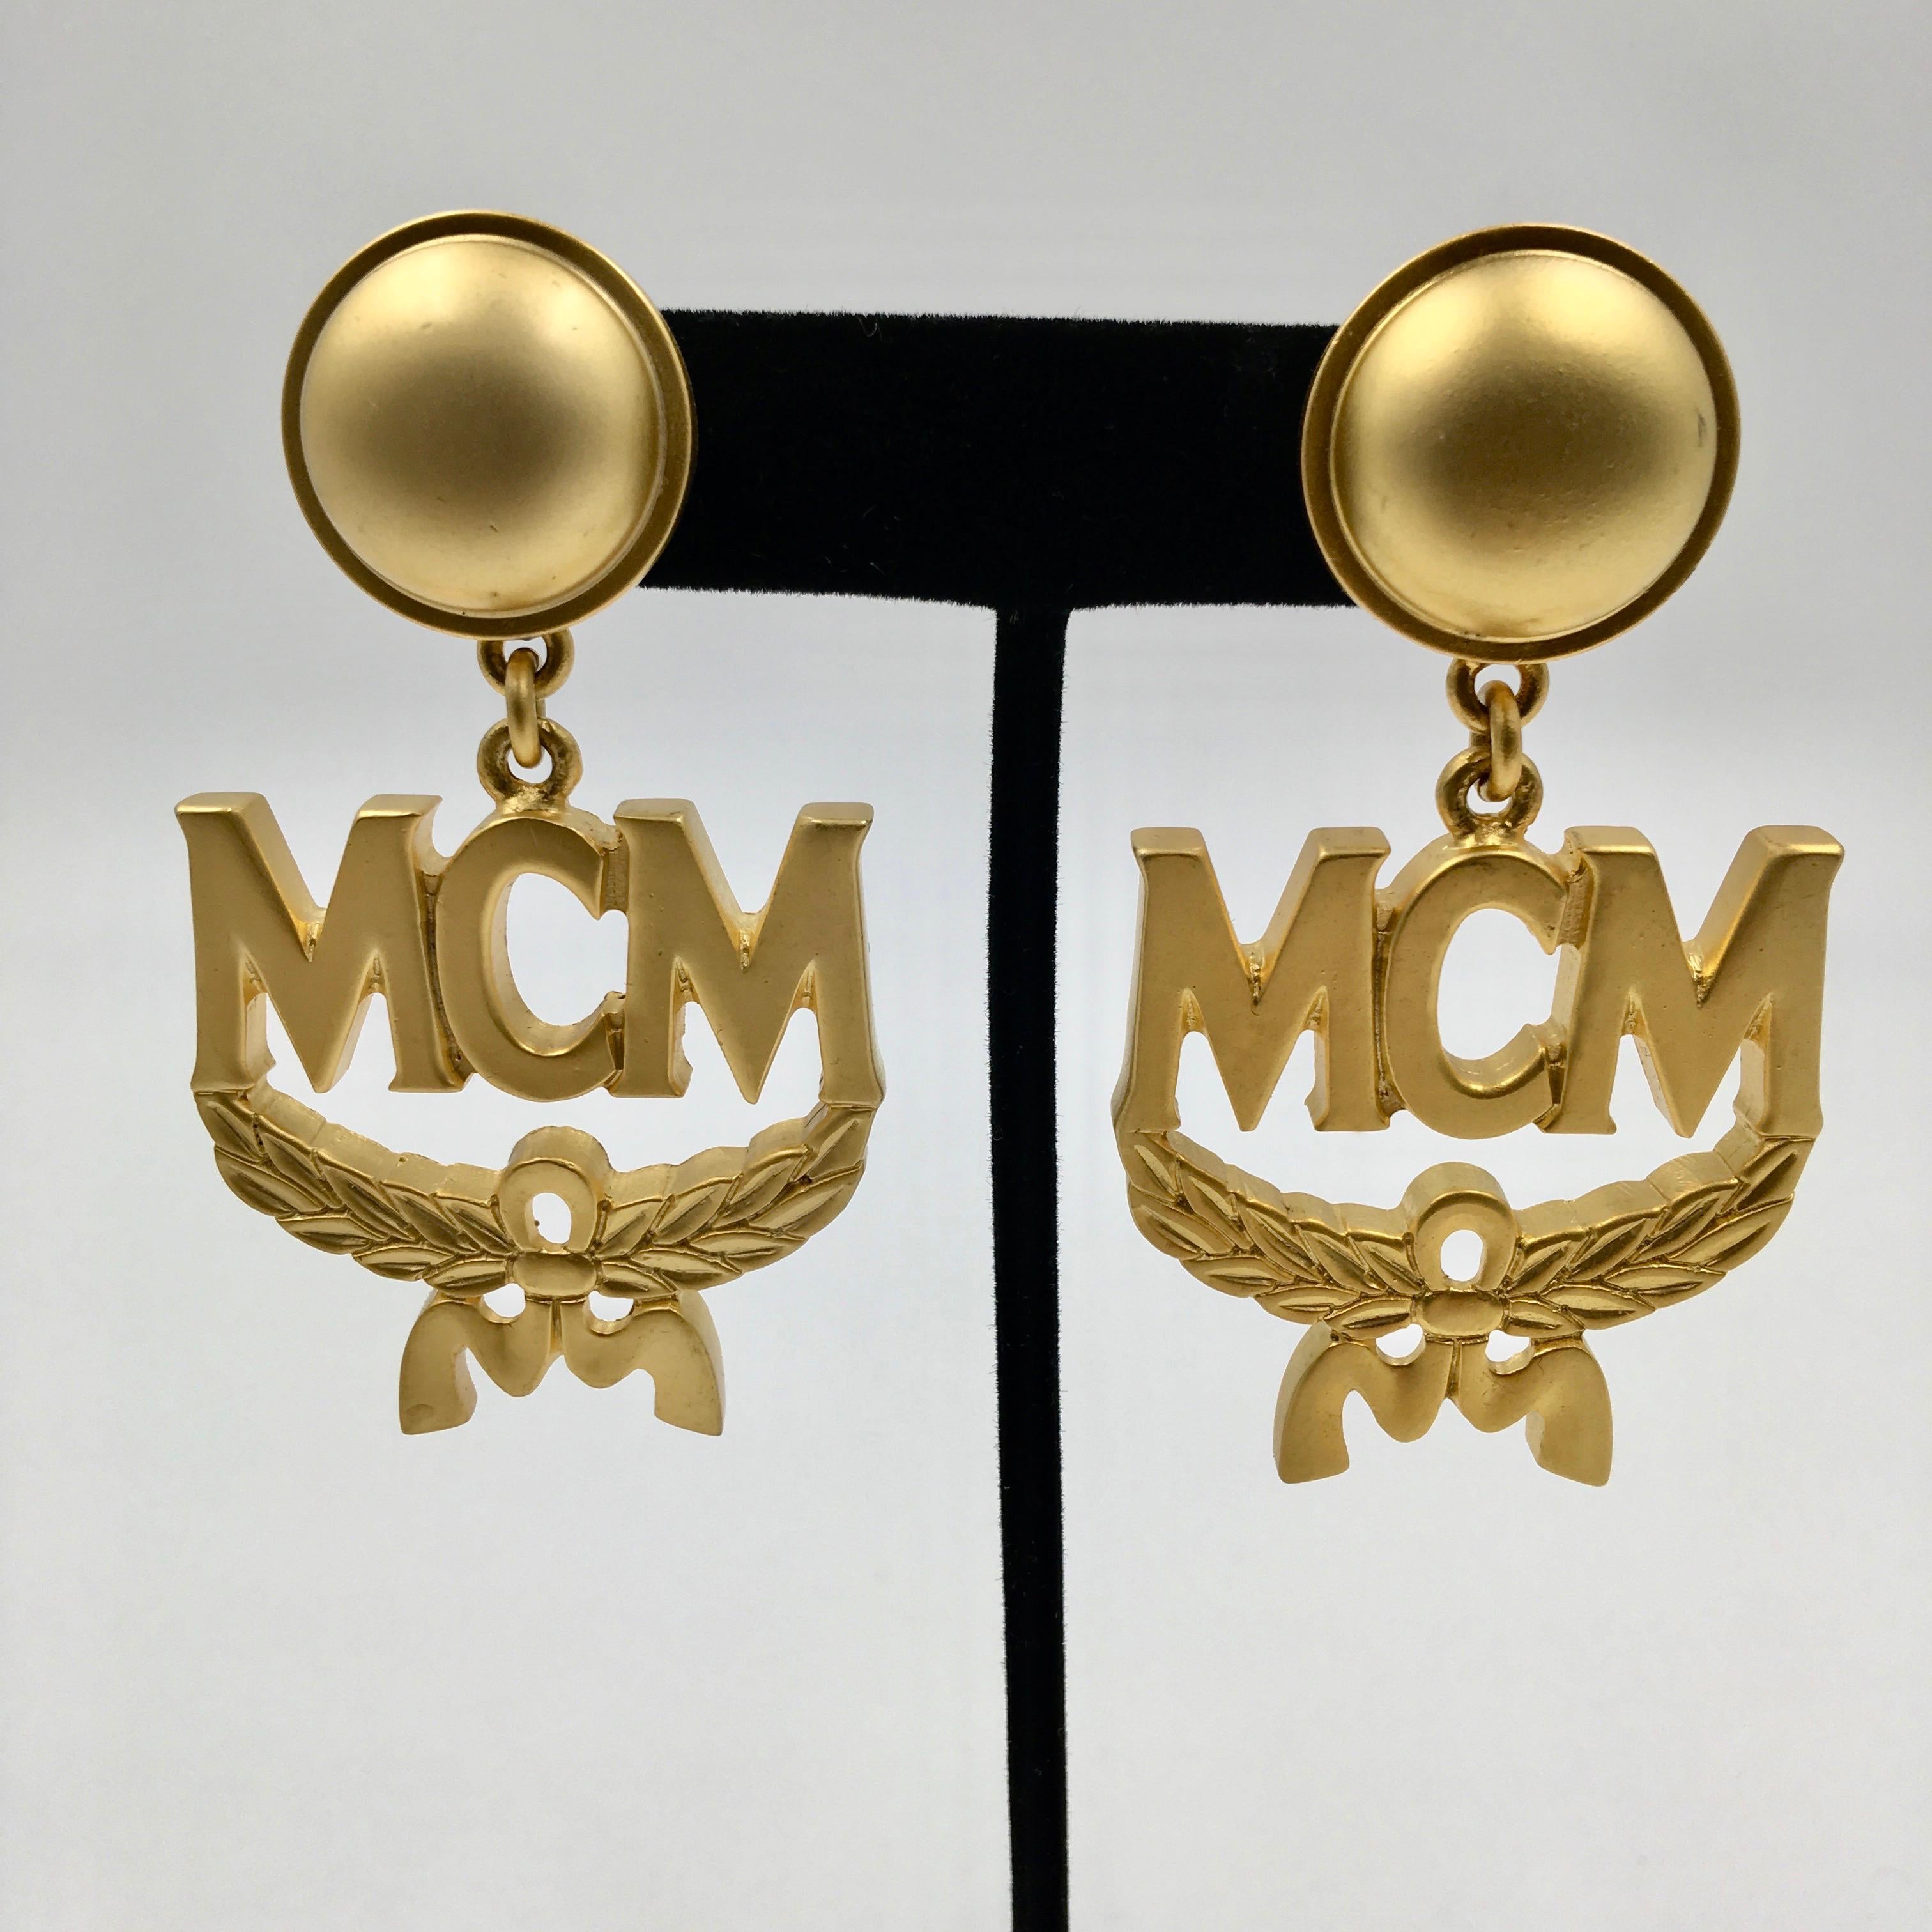 MCM Wreath Logo Matte Gold Tone Clip On Earrings. Original tags attached. Made in Italy. 
In great vintage condition.

Measurements are as follows:

Width- 1 1/2